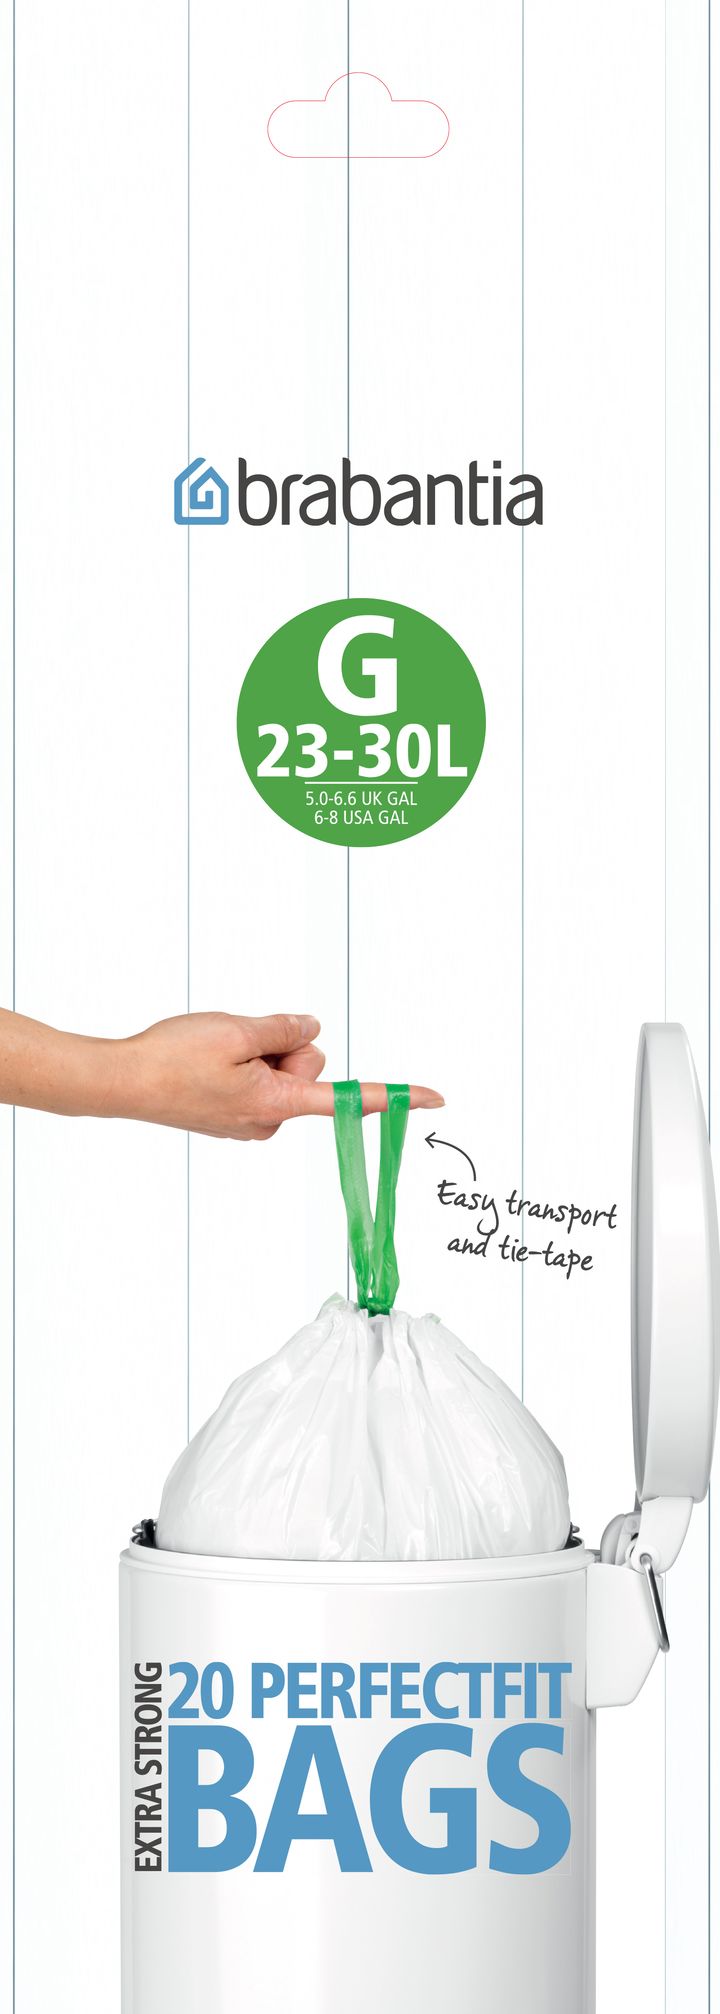 Waste Bags G for bins of 23-30 liters 20 bags/roll - 23-30 L - Brabantia